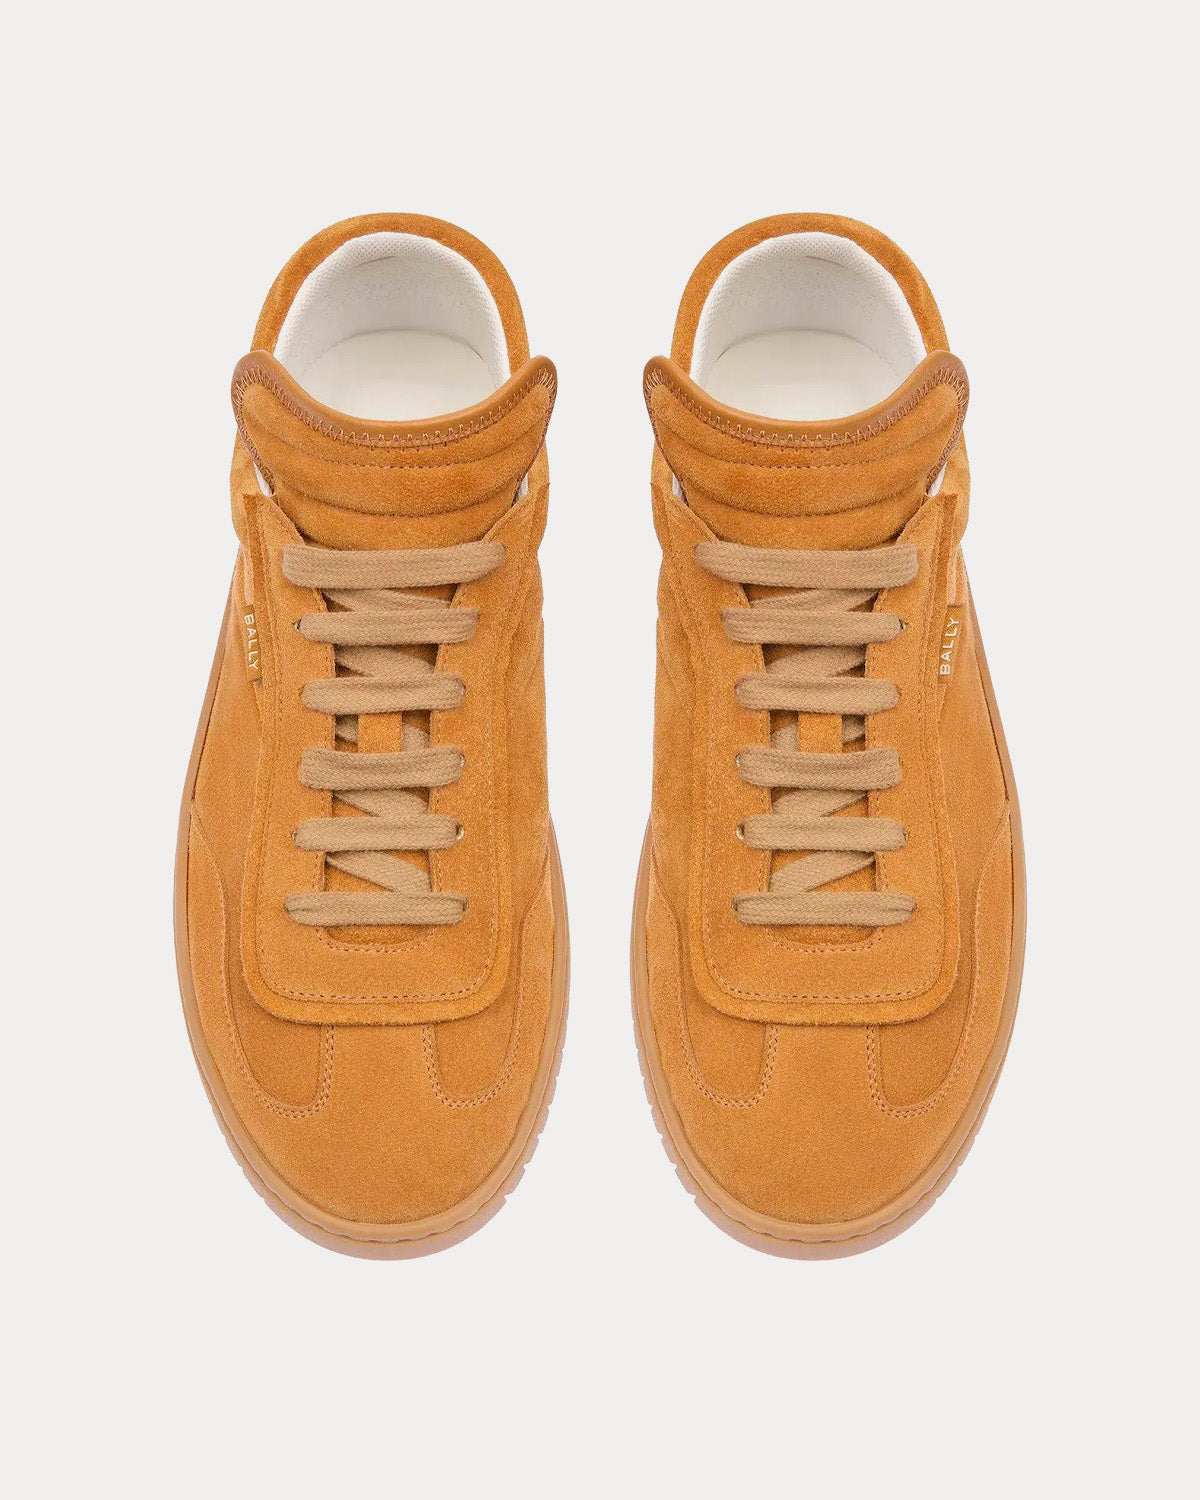 Bally - Player Suede Desert / Amber Low Top Sneakers